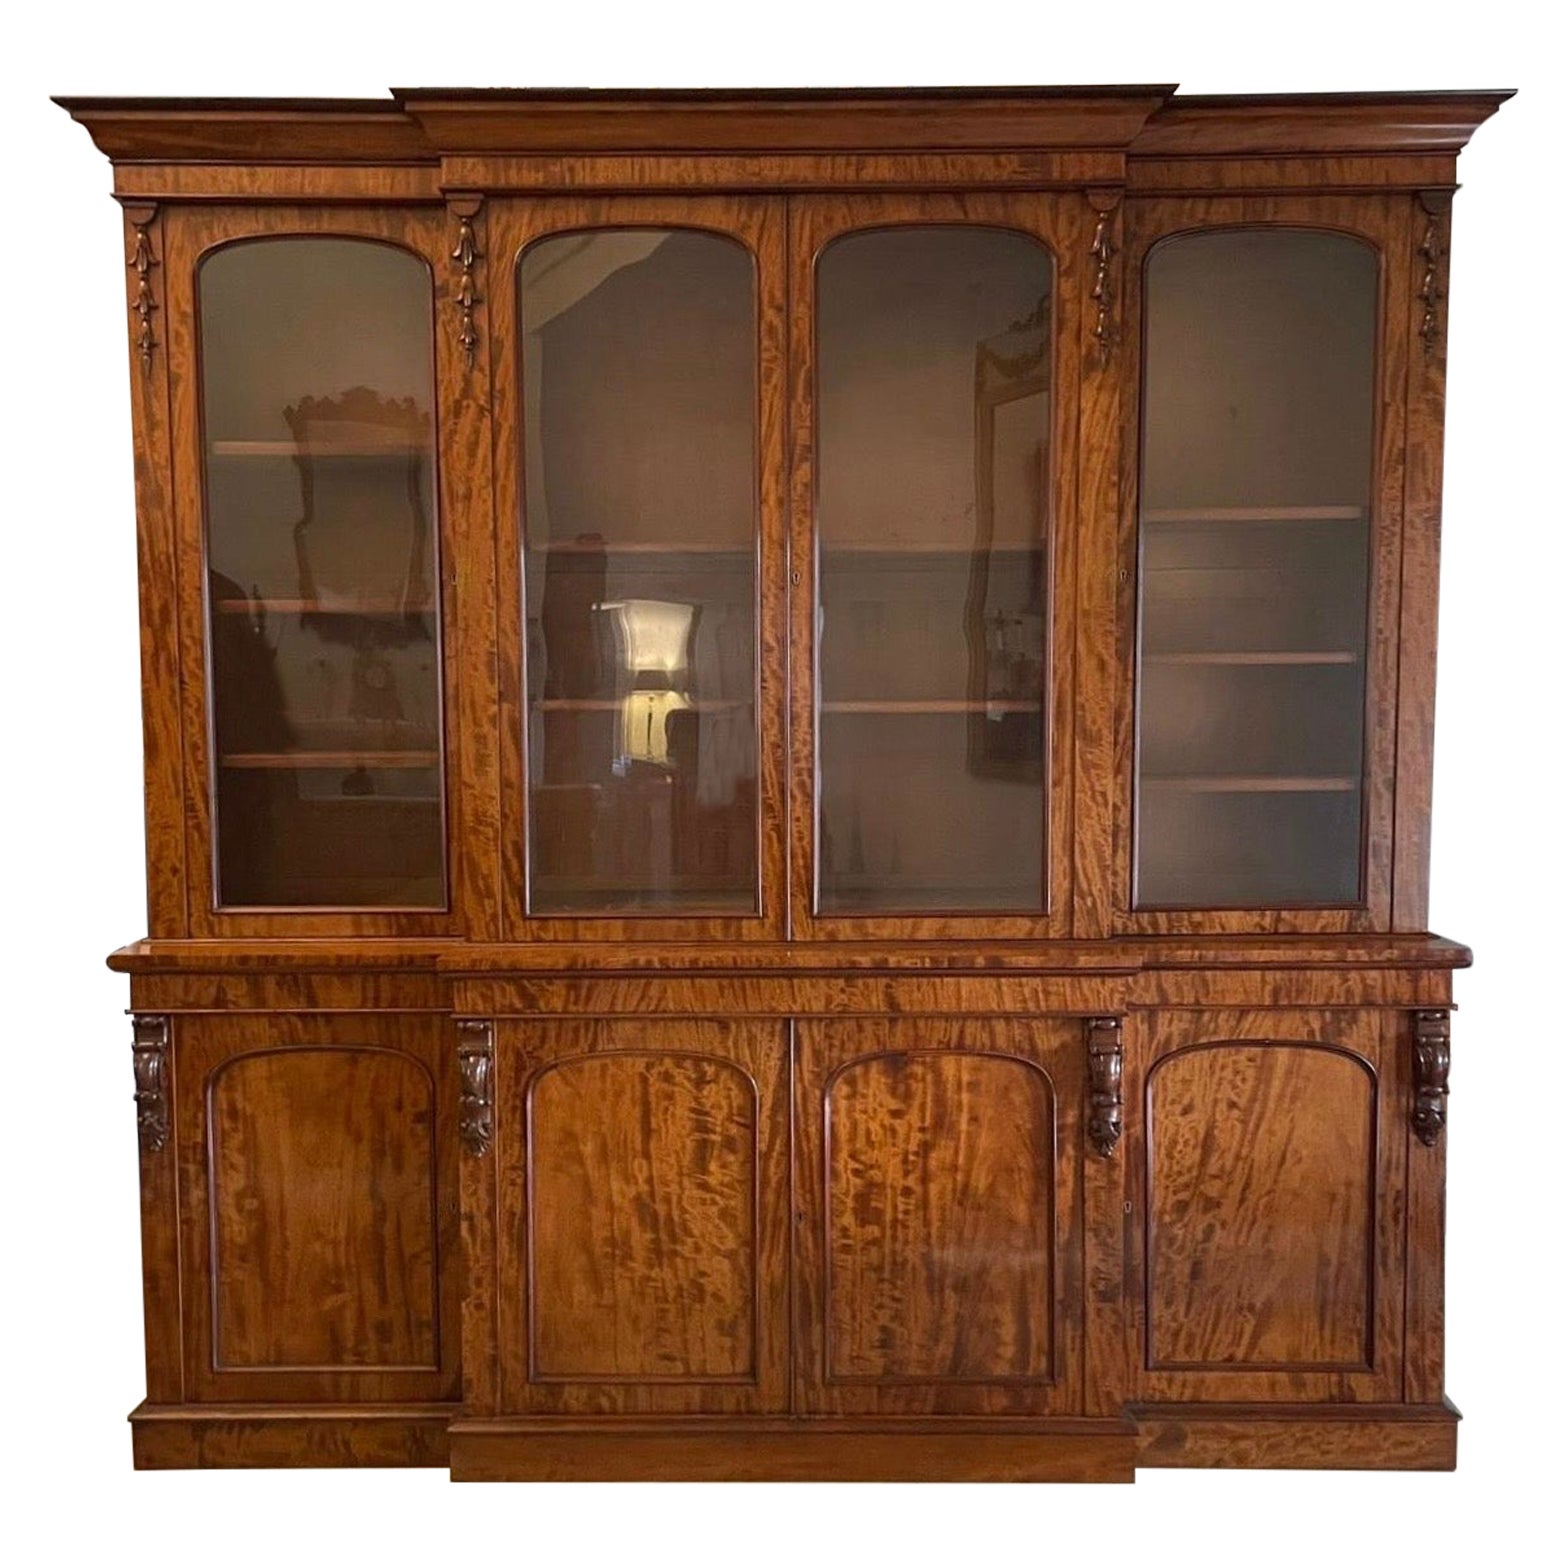 Outstanding Quality Large Antique Victorian Figured Mahogany Breakfront Bookcase For Sale